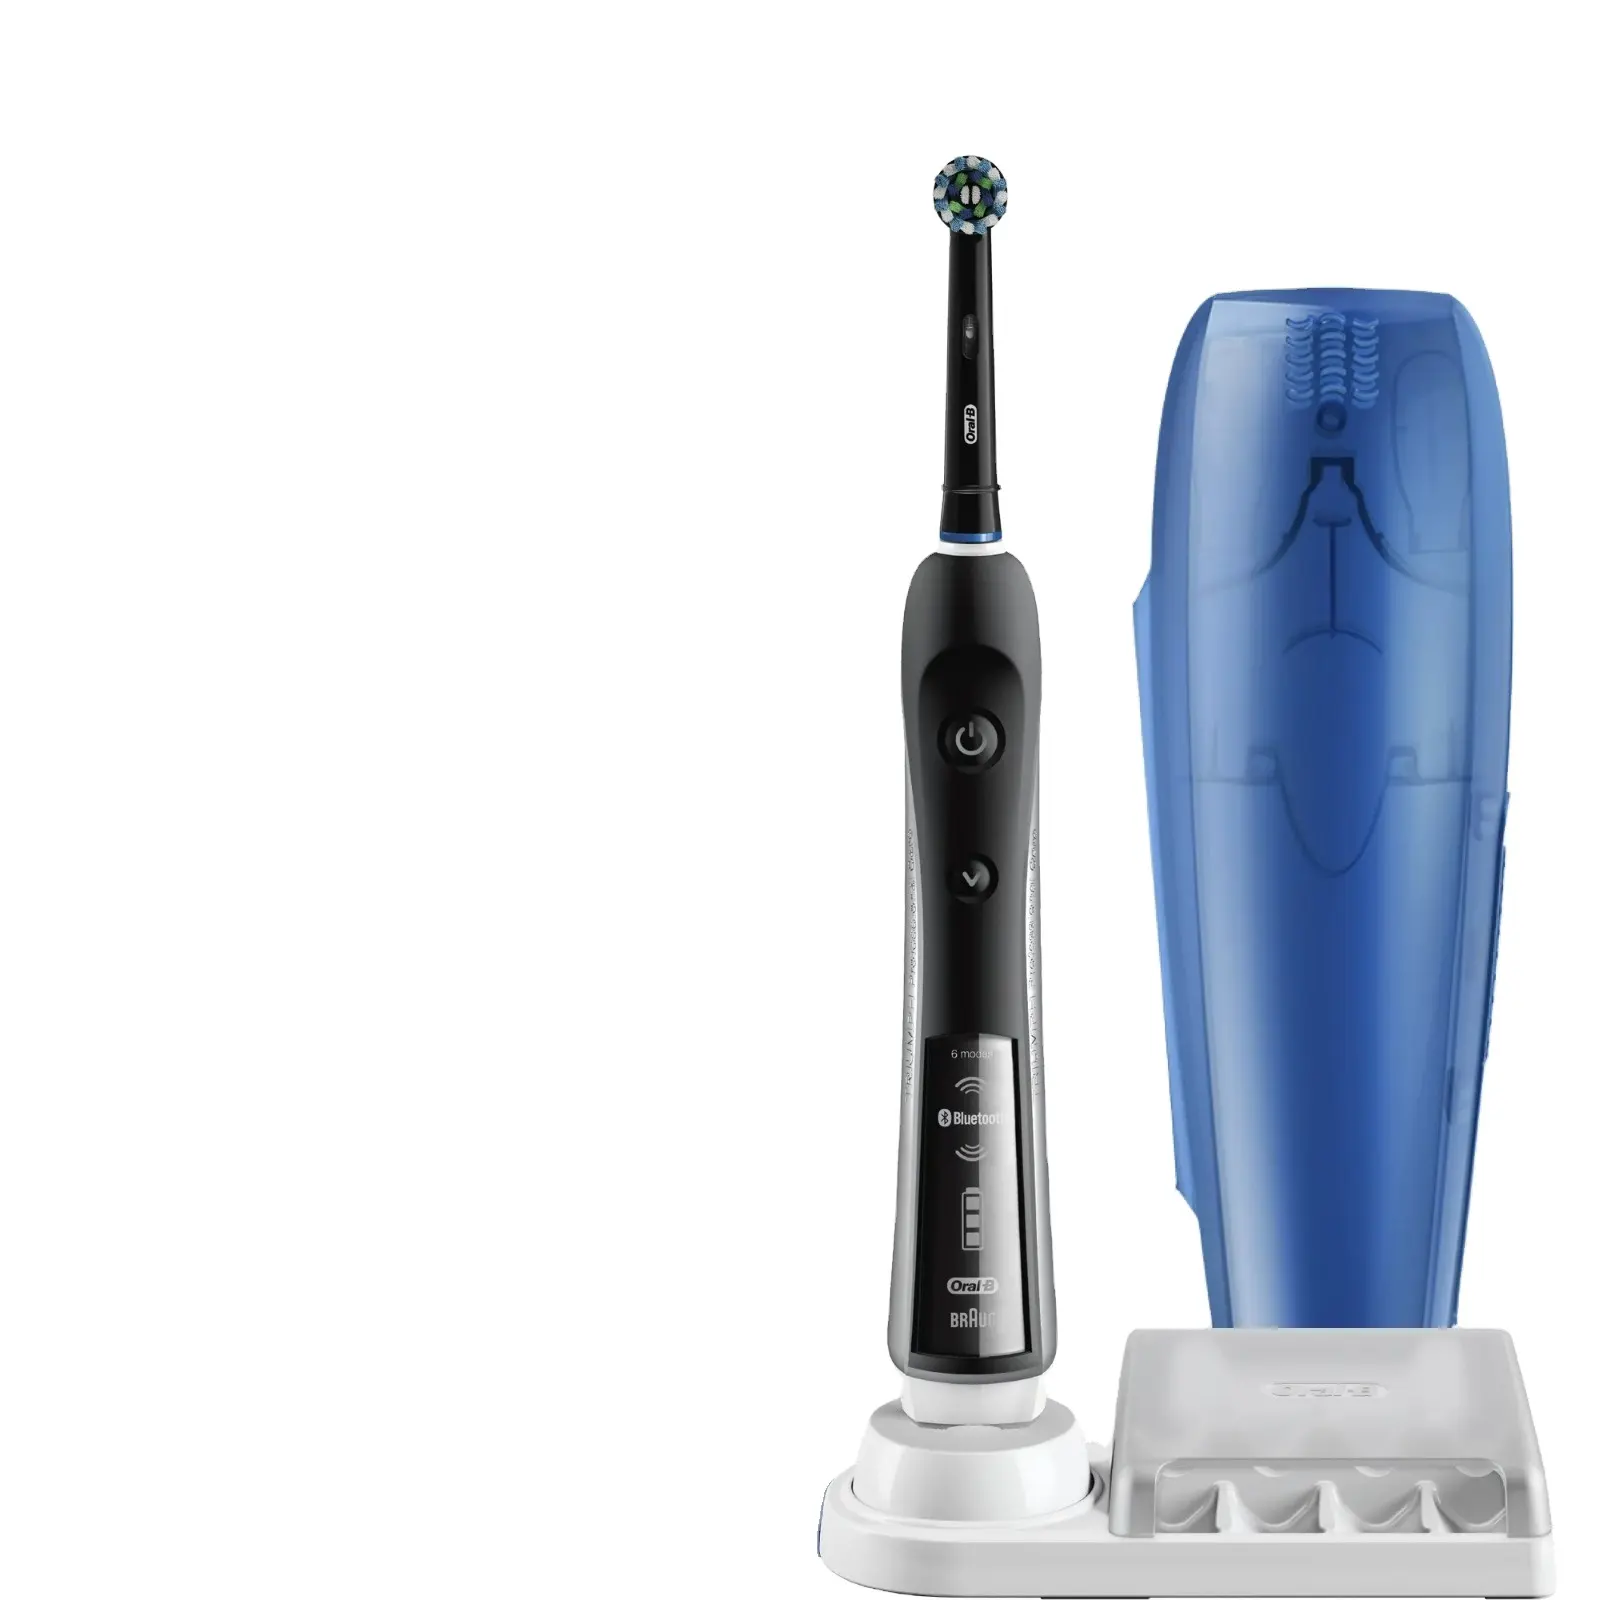 Oral-B Smart Series 5000 Rechargeable Electric Toothbrush, Black